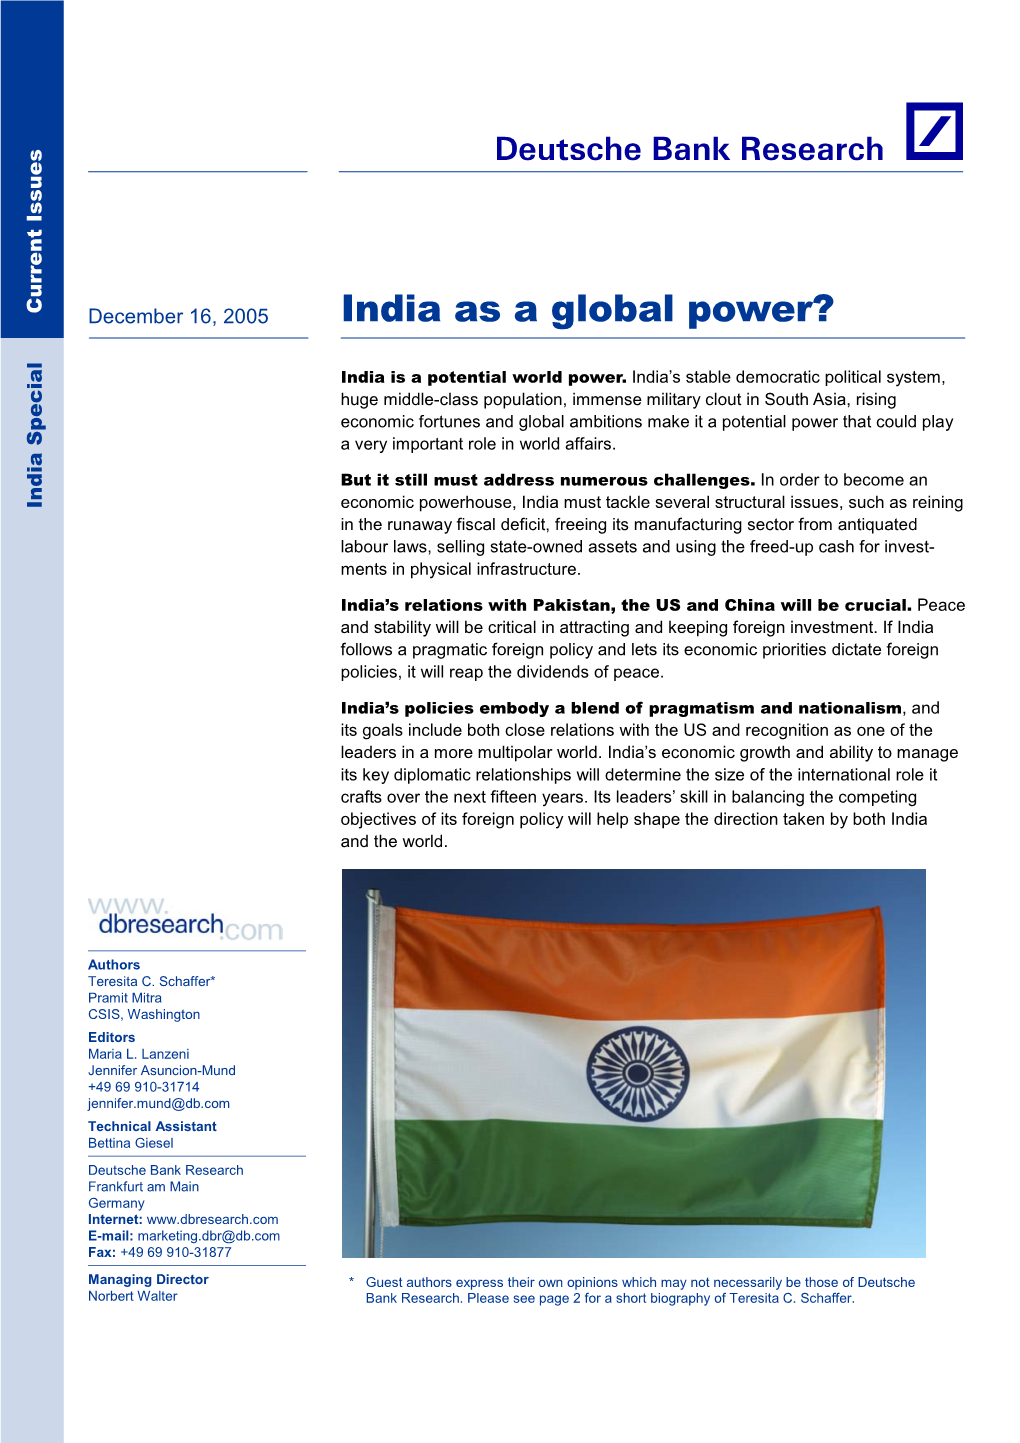 India As a Global Power?